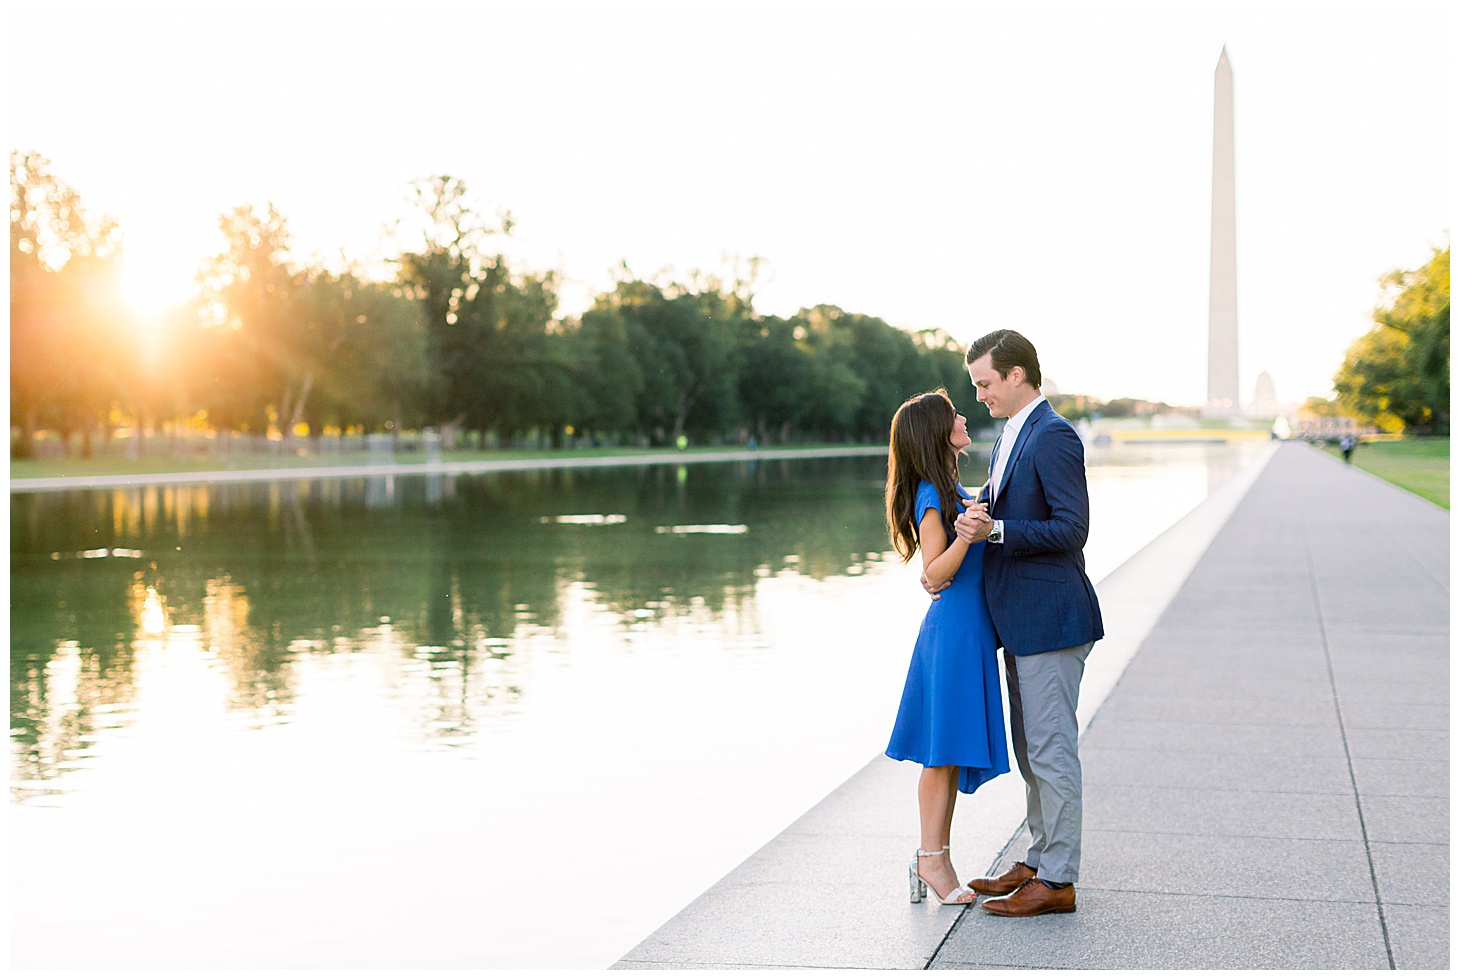 Preppy Morning Engagement Portraits at Lincoln Memorial Reflecting Pool by Sarah Bradshaw Photography